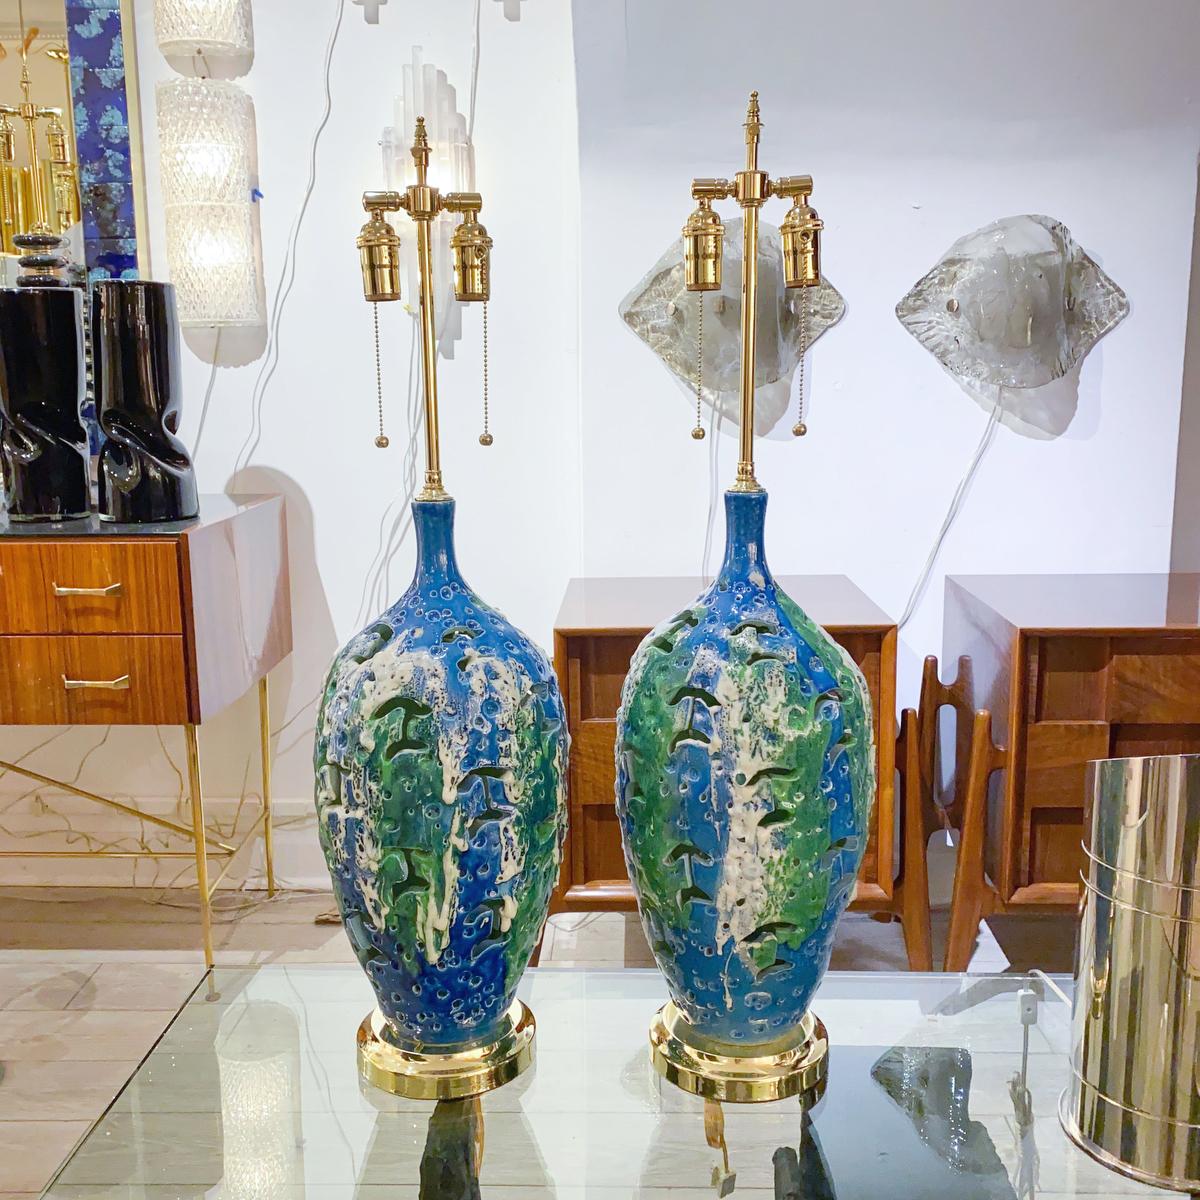 Pair of mottled blue, green and white ceramic table lamps with openwork design.